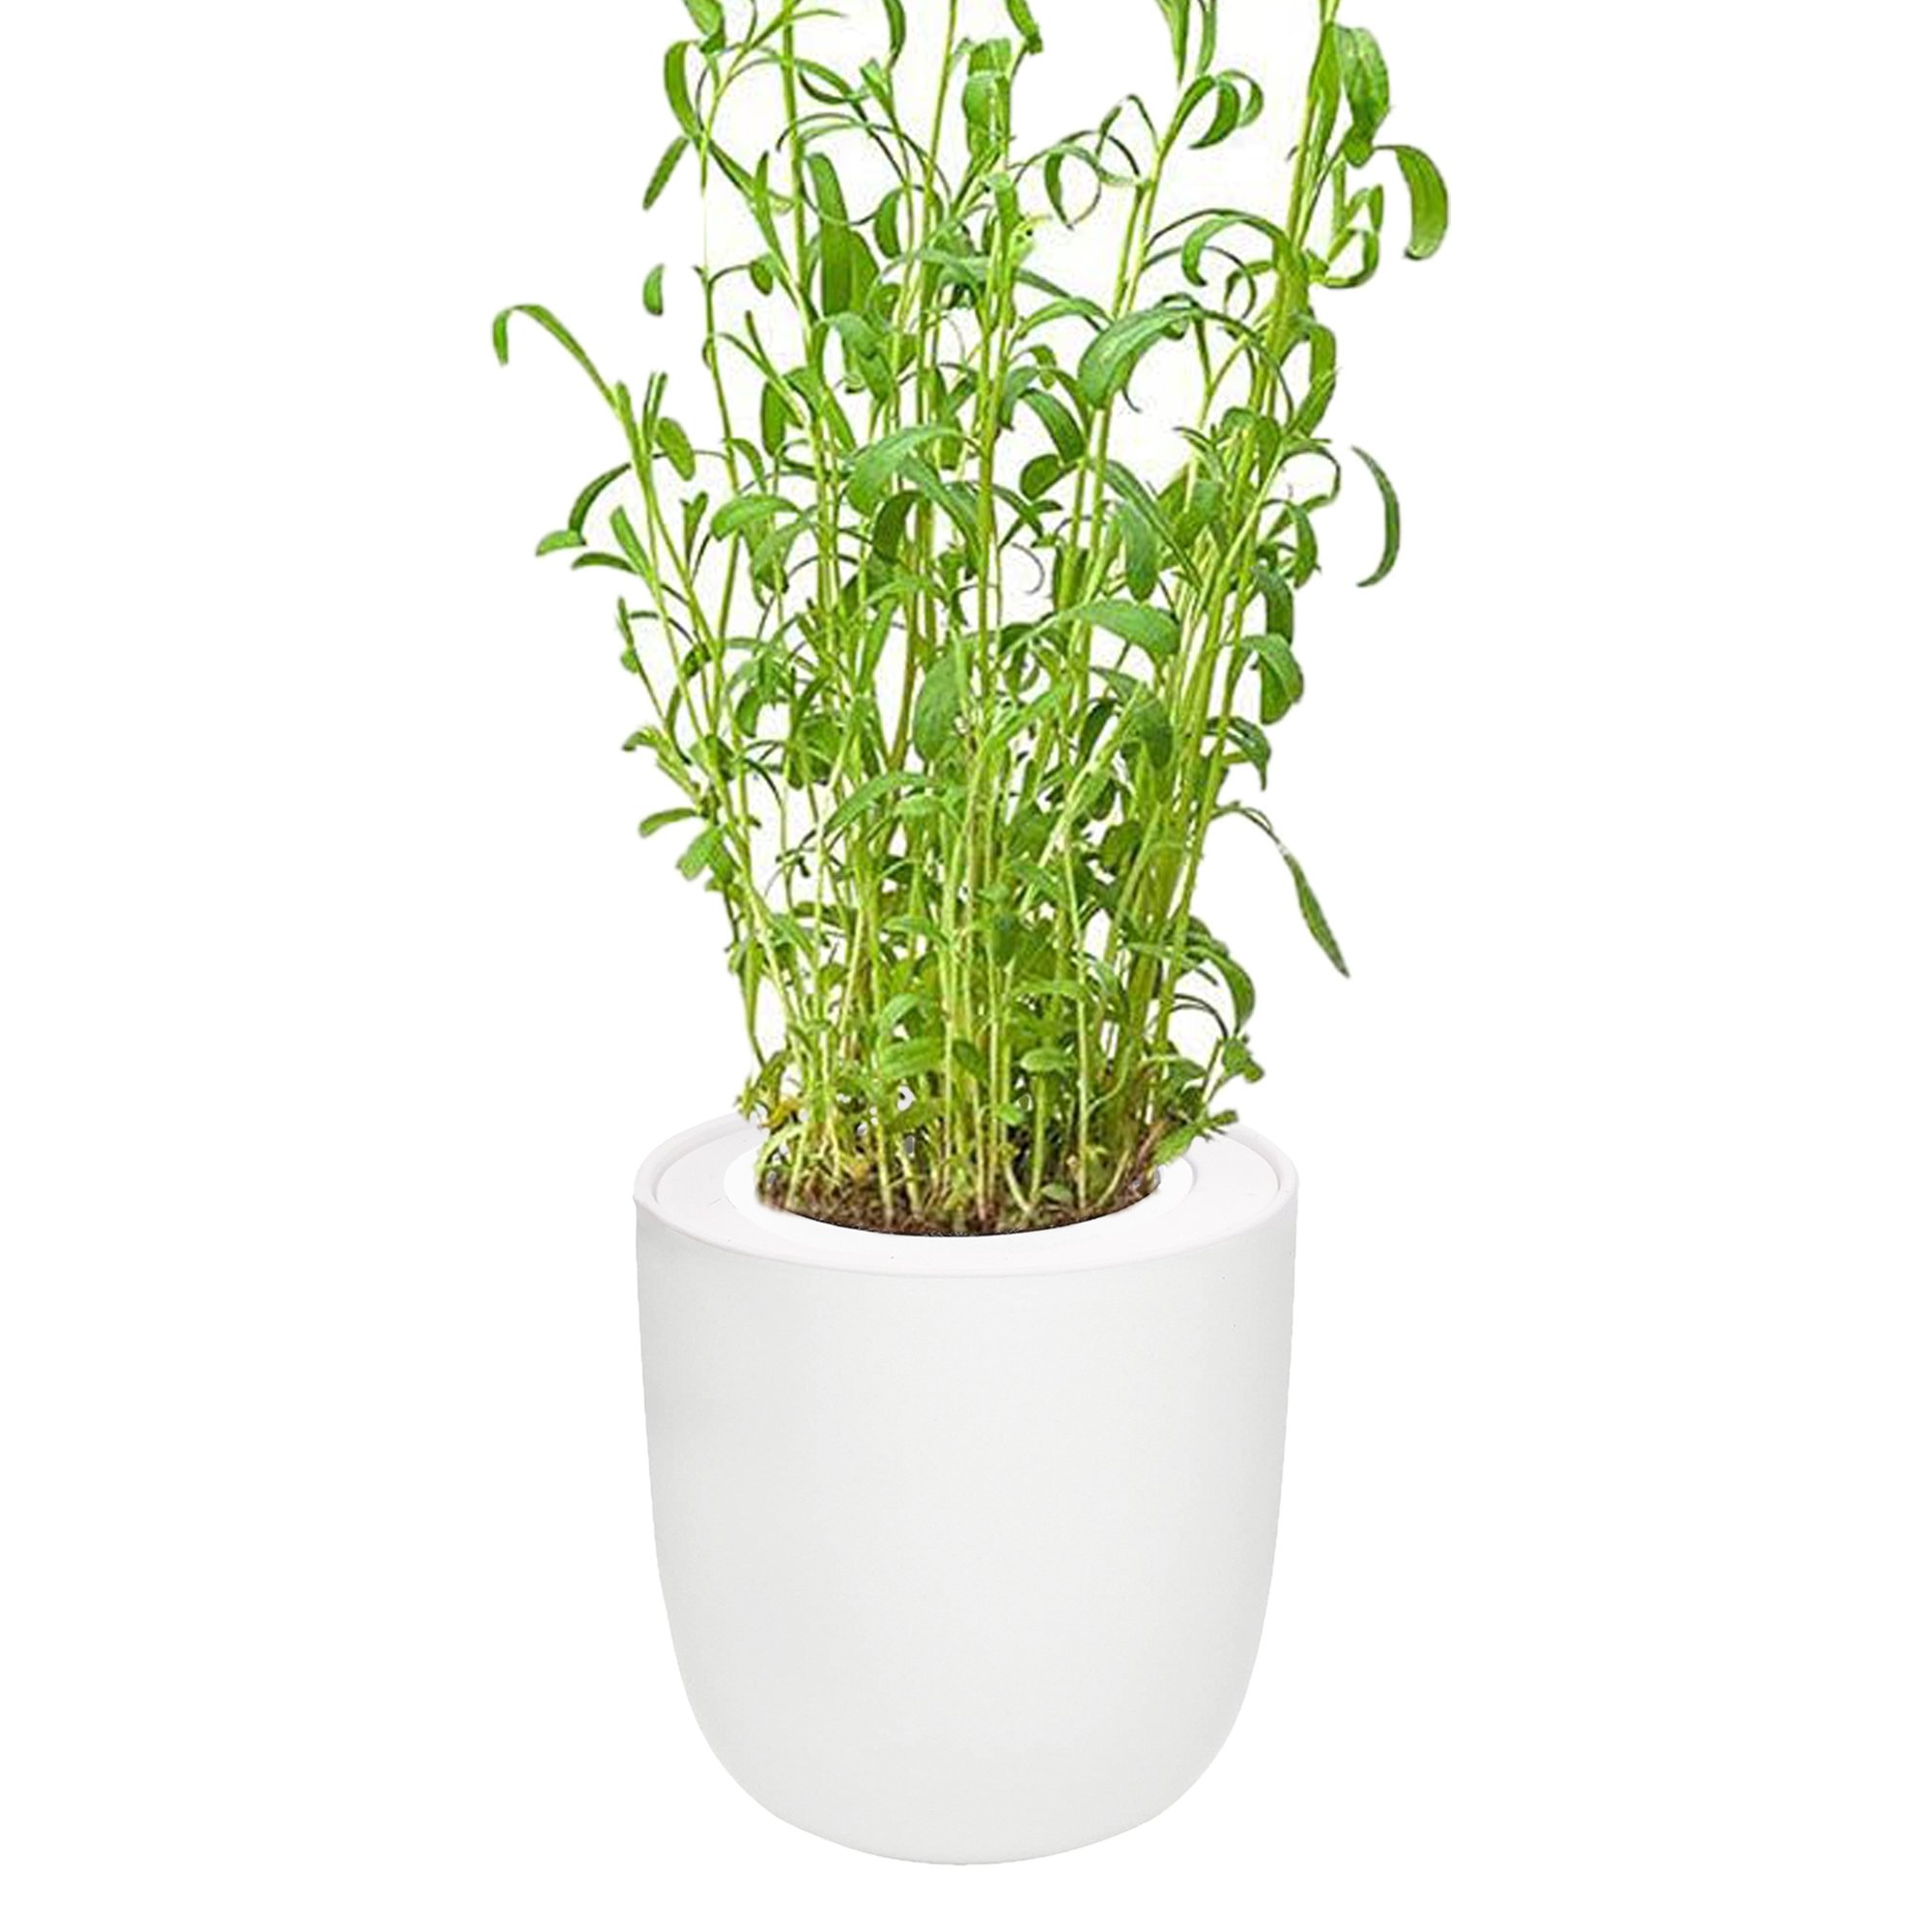 Tarragon White Ceramic Pot Hydroponic Growing Kit with Seeds